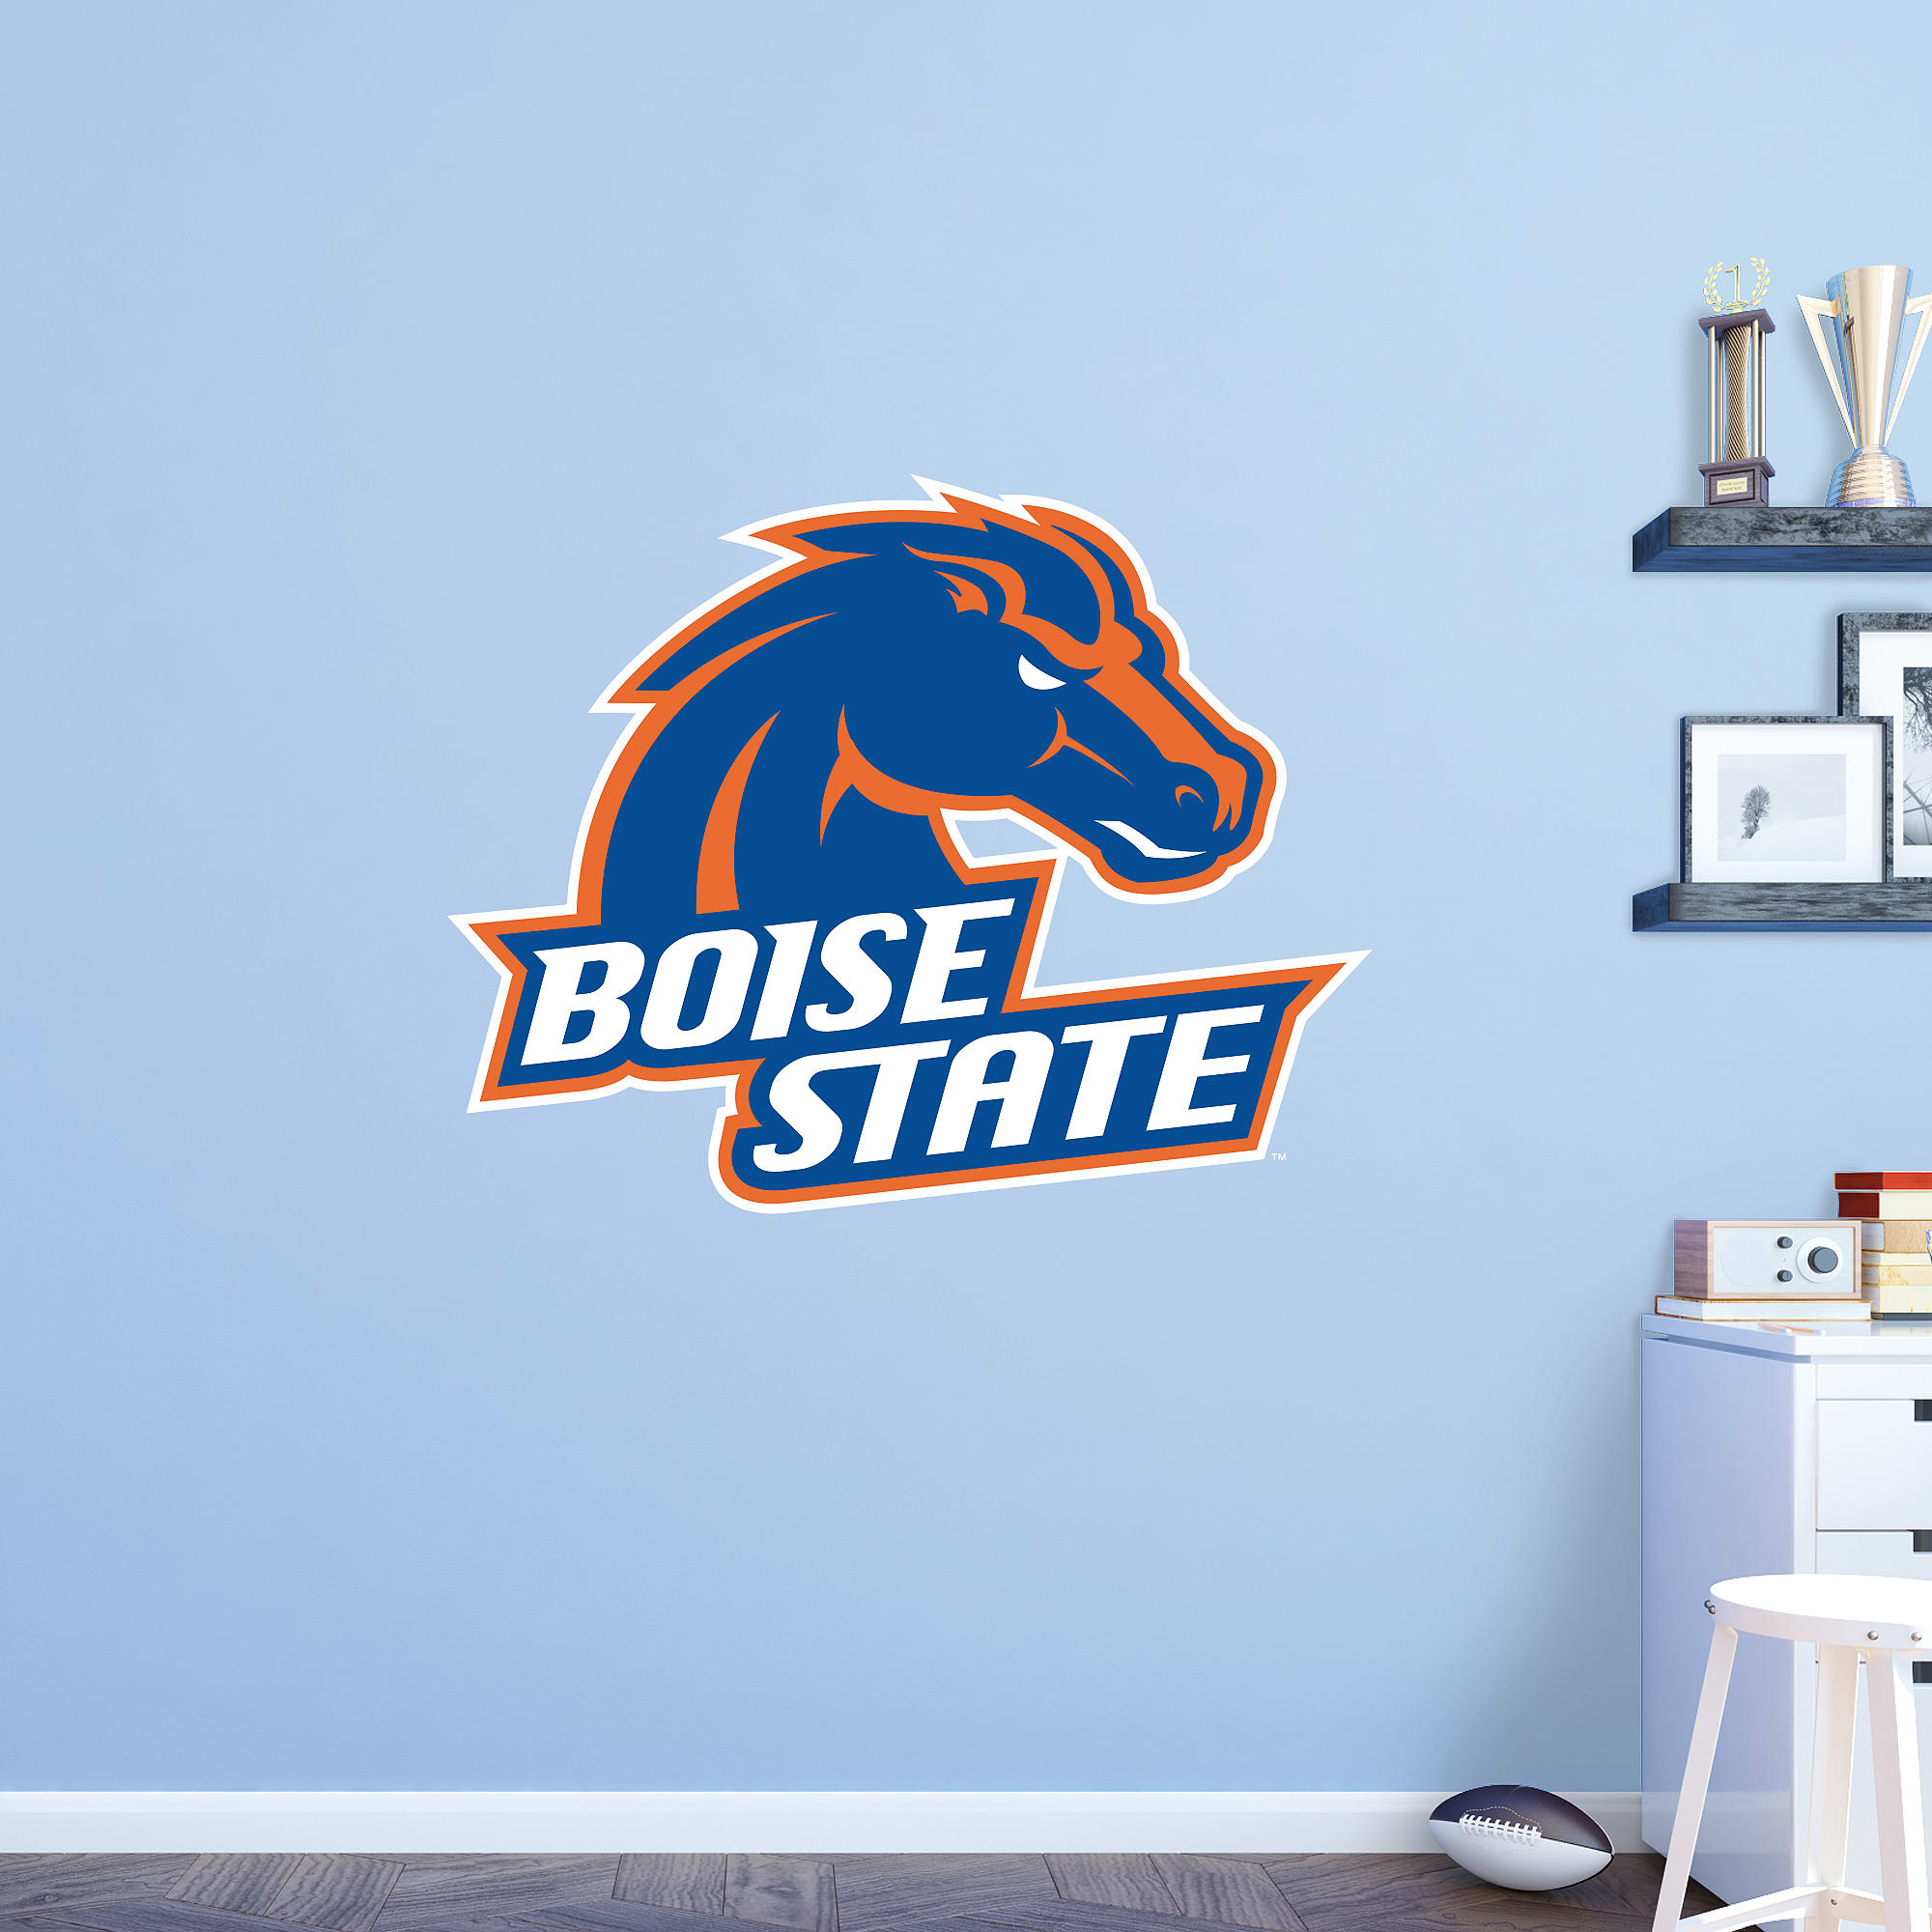 Boise State Broncos: Logo - Officially Licensed Removable Wall Decal 49.0"W x 39.0"H by Fathead | Vinyl